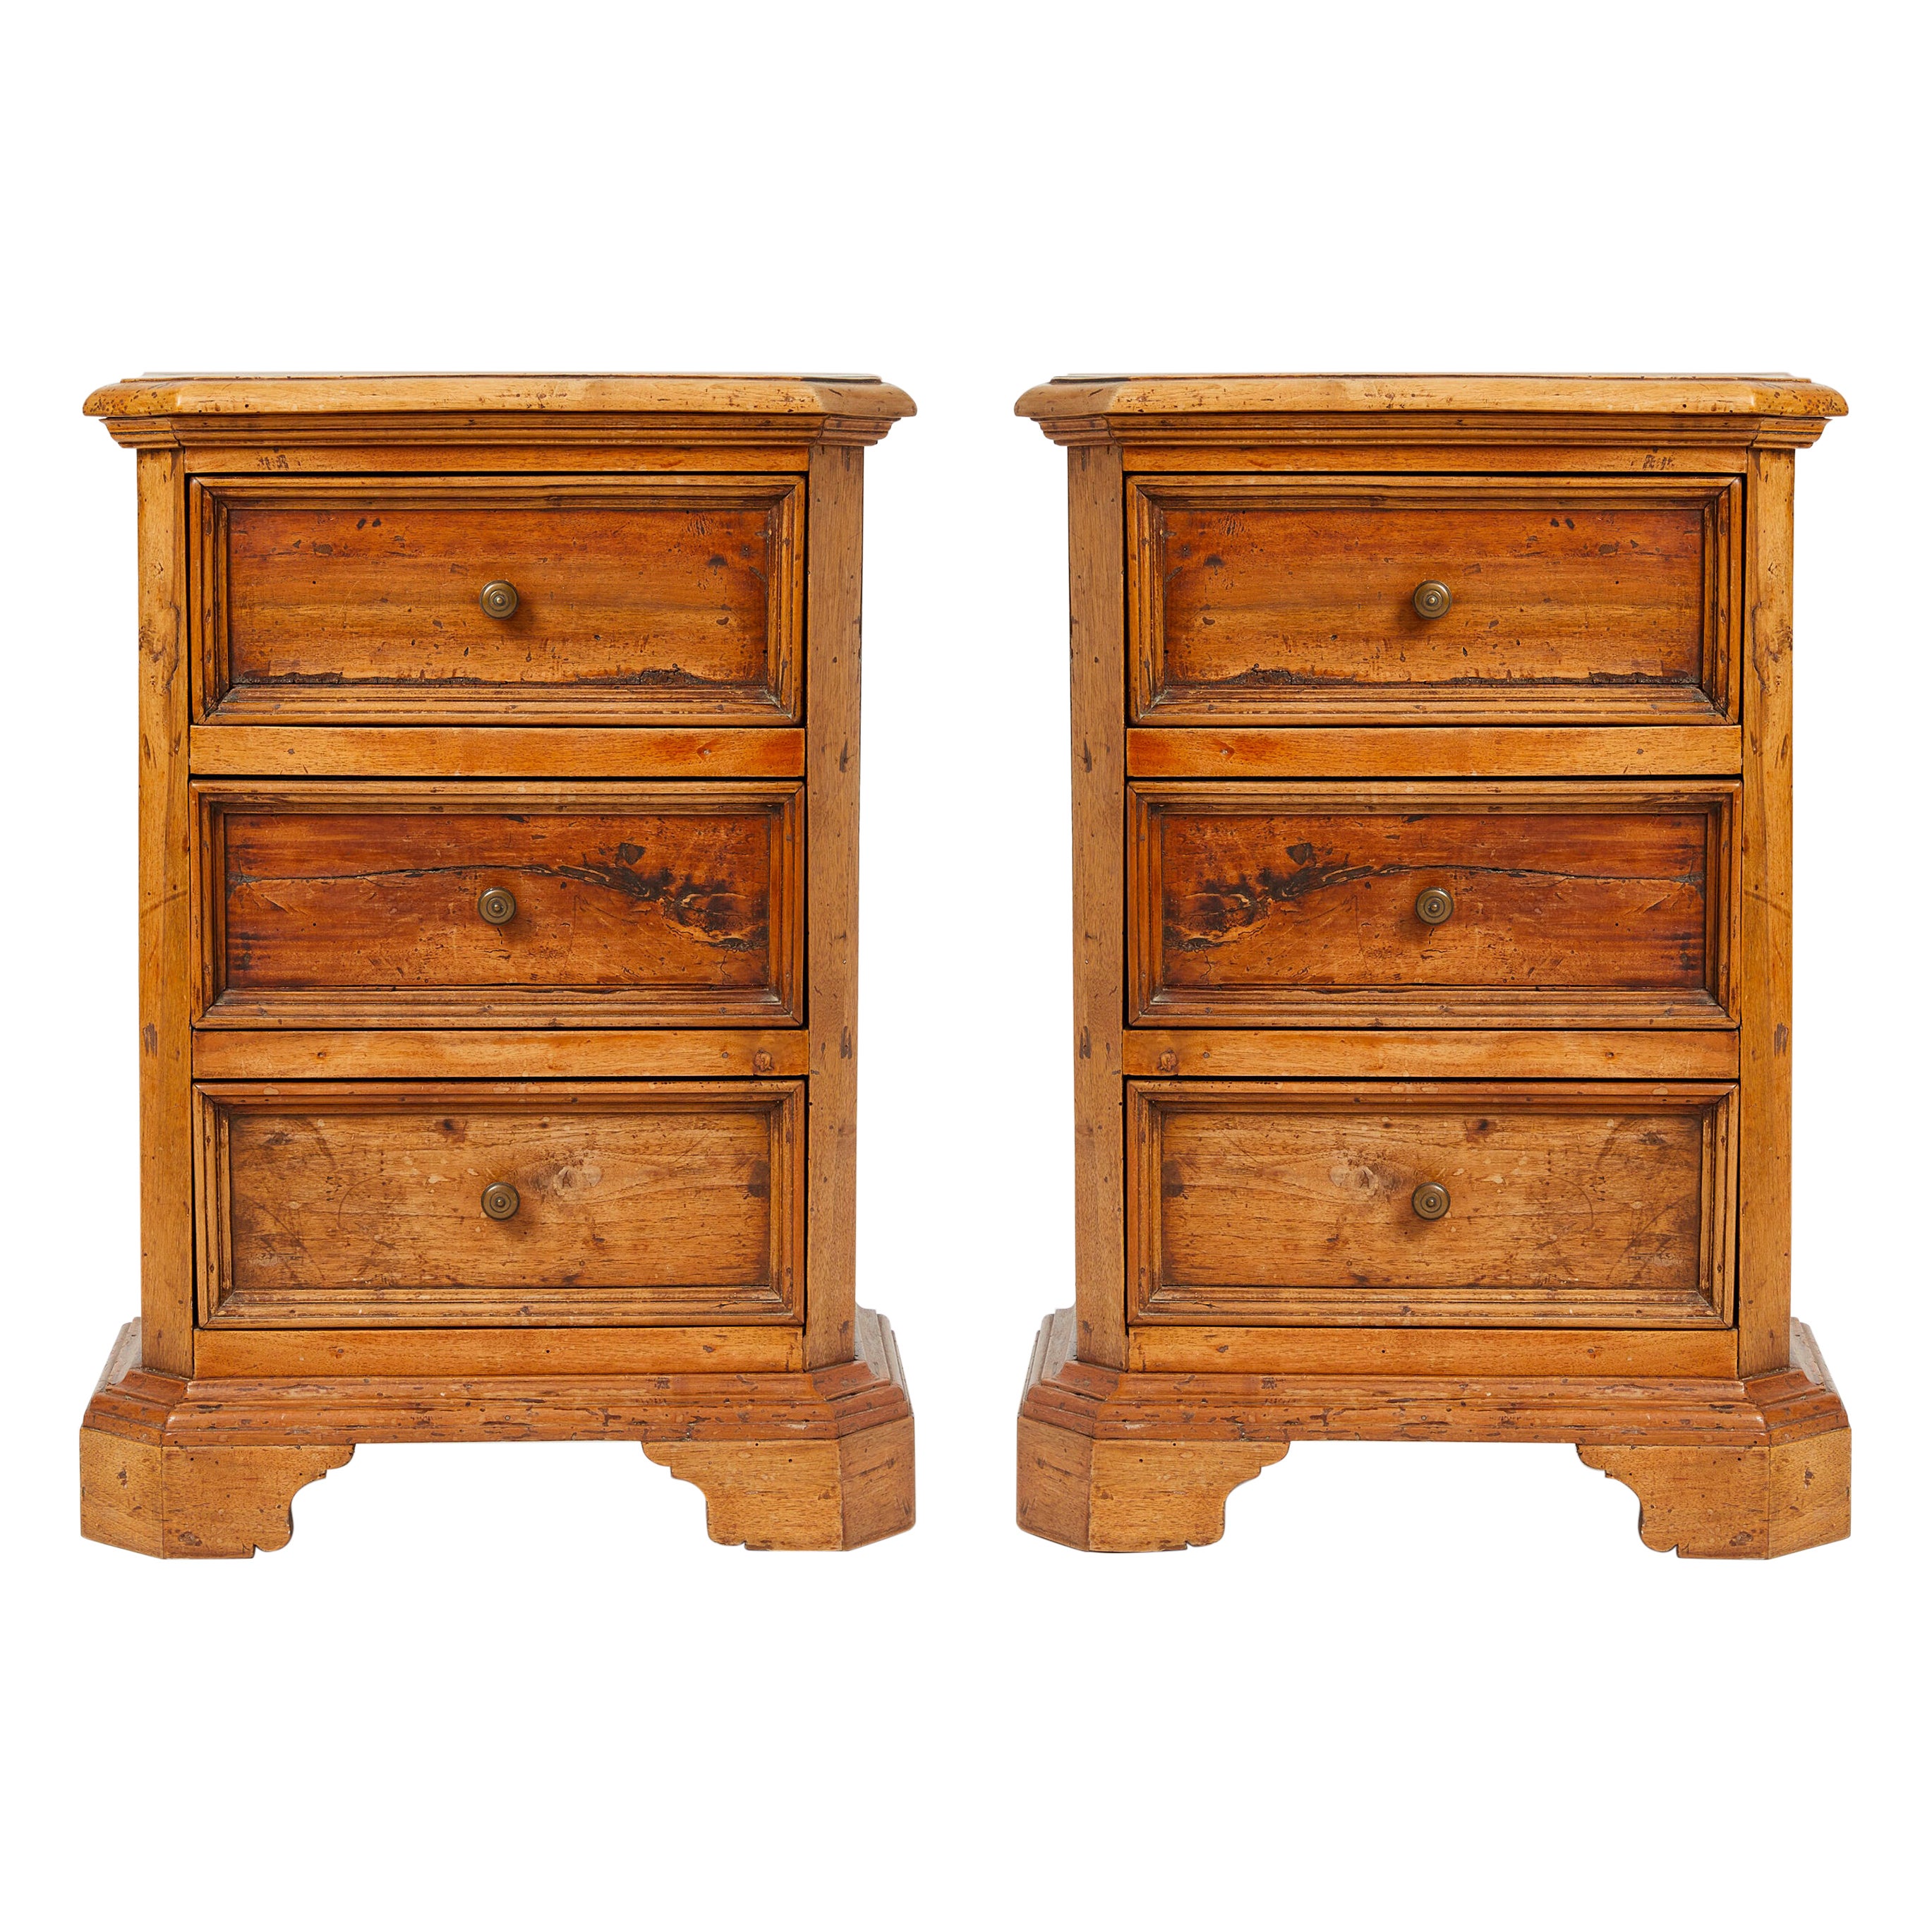 Pair of 19th Century Tuscan Walnut Bedside Tables